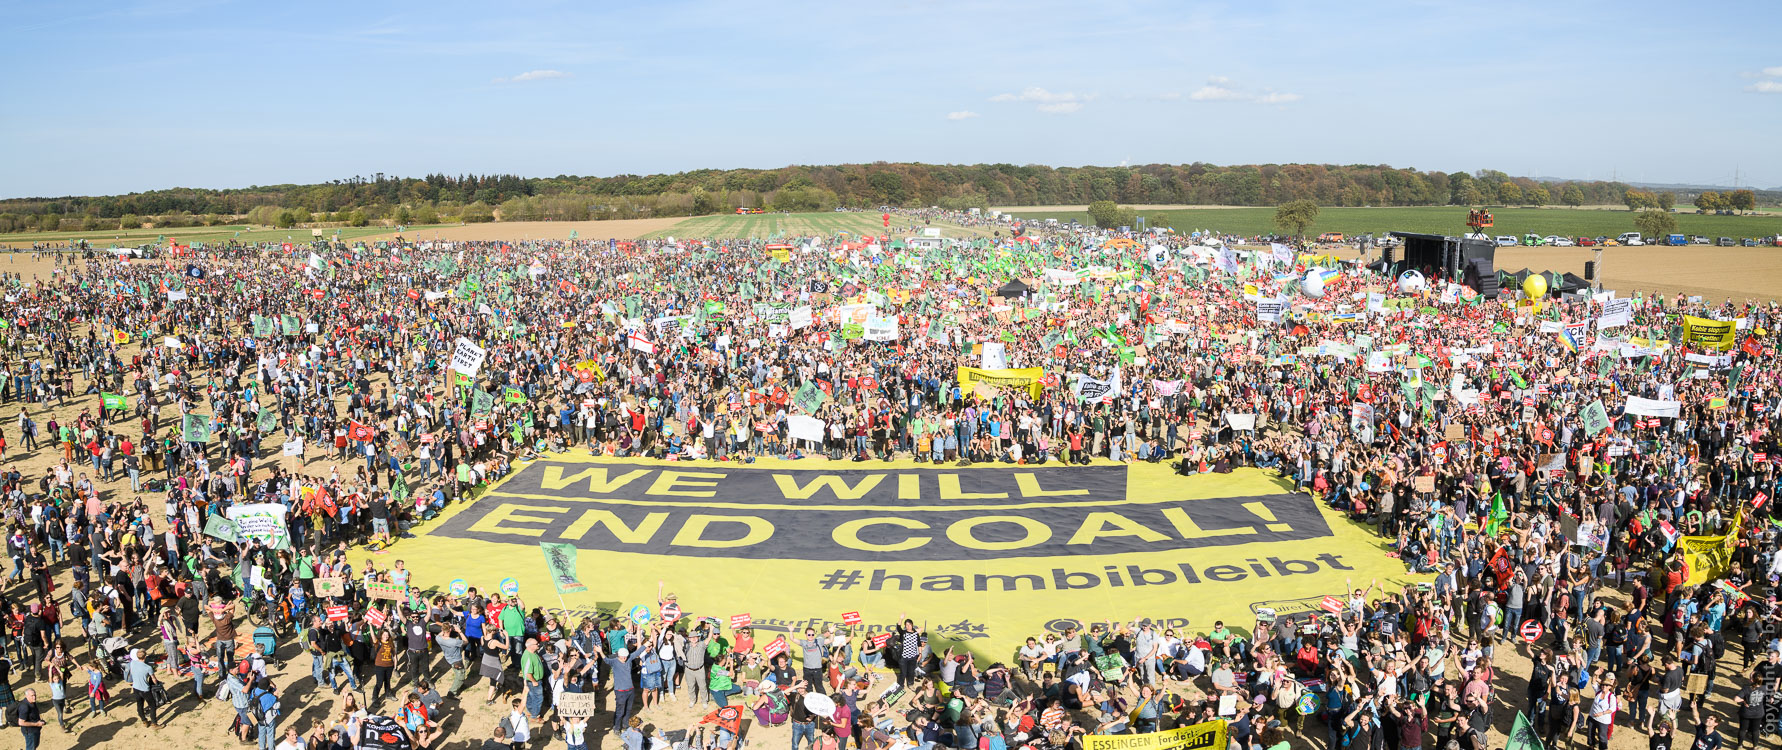 Panoramea - Demonstration for Climate Protection and Hambach Forest - Save Forest - Stop Coal